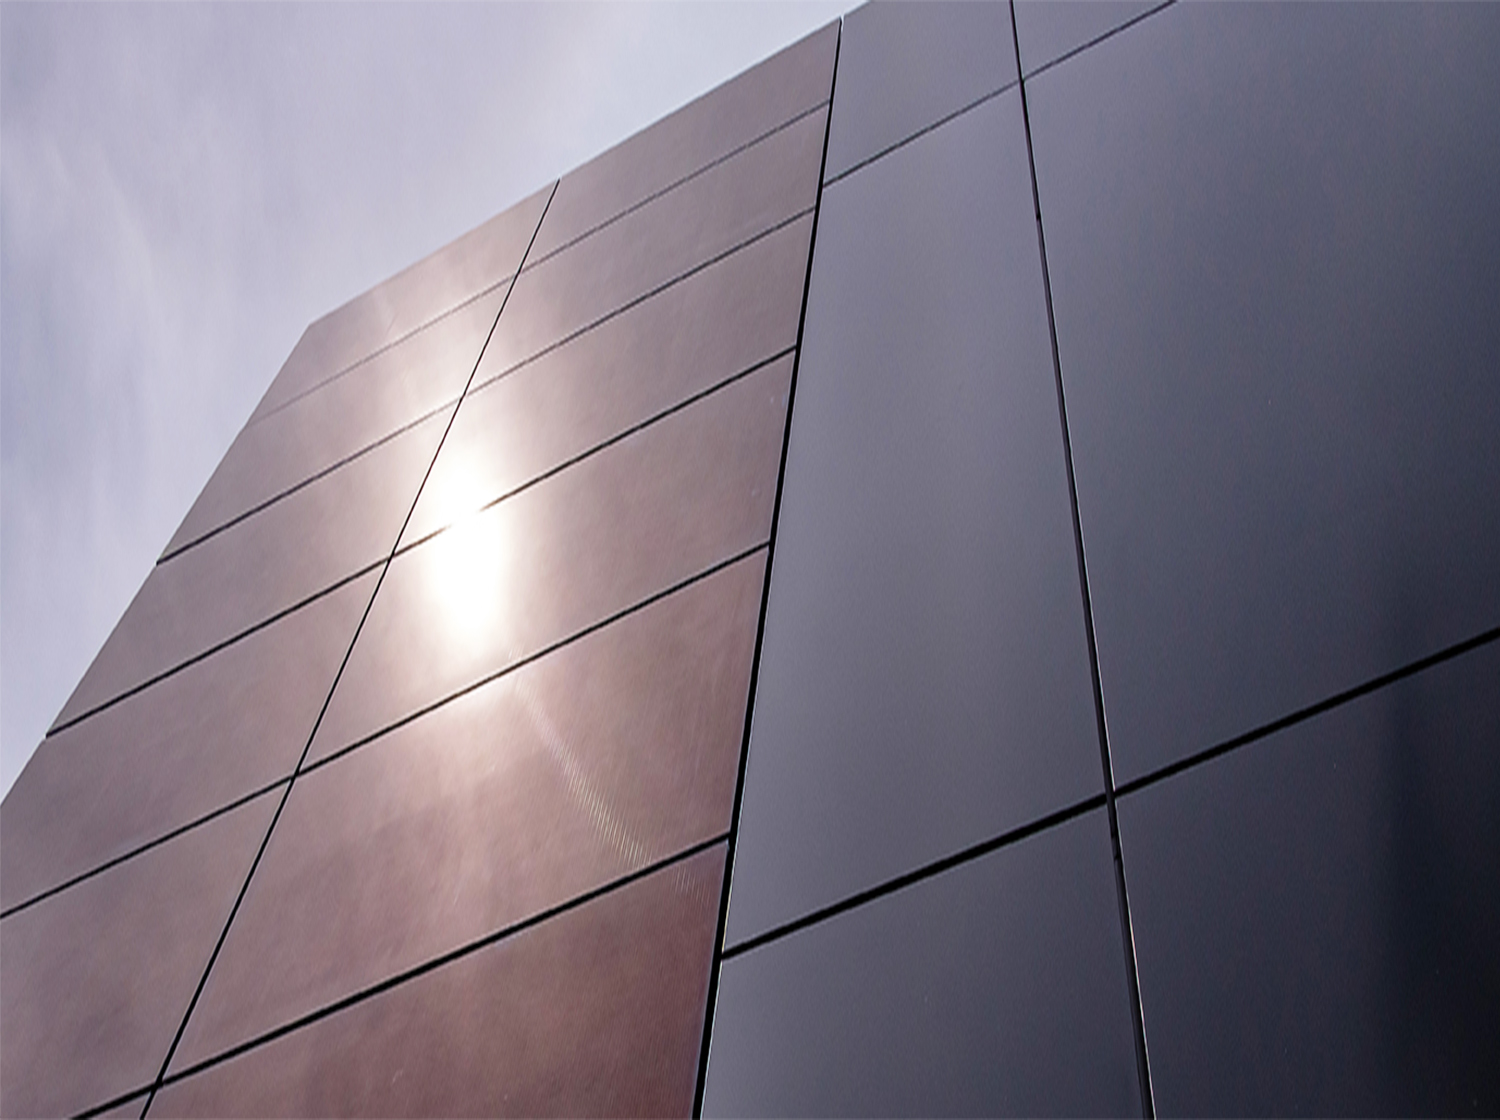 The Unyielding Shield: Aluminum Cladding's Remarkable Weather Resistance